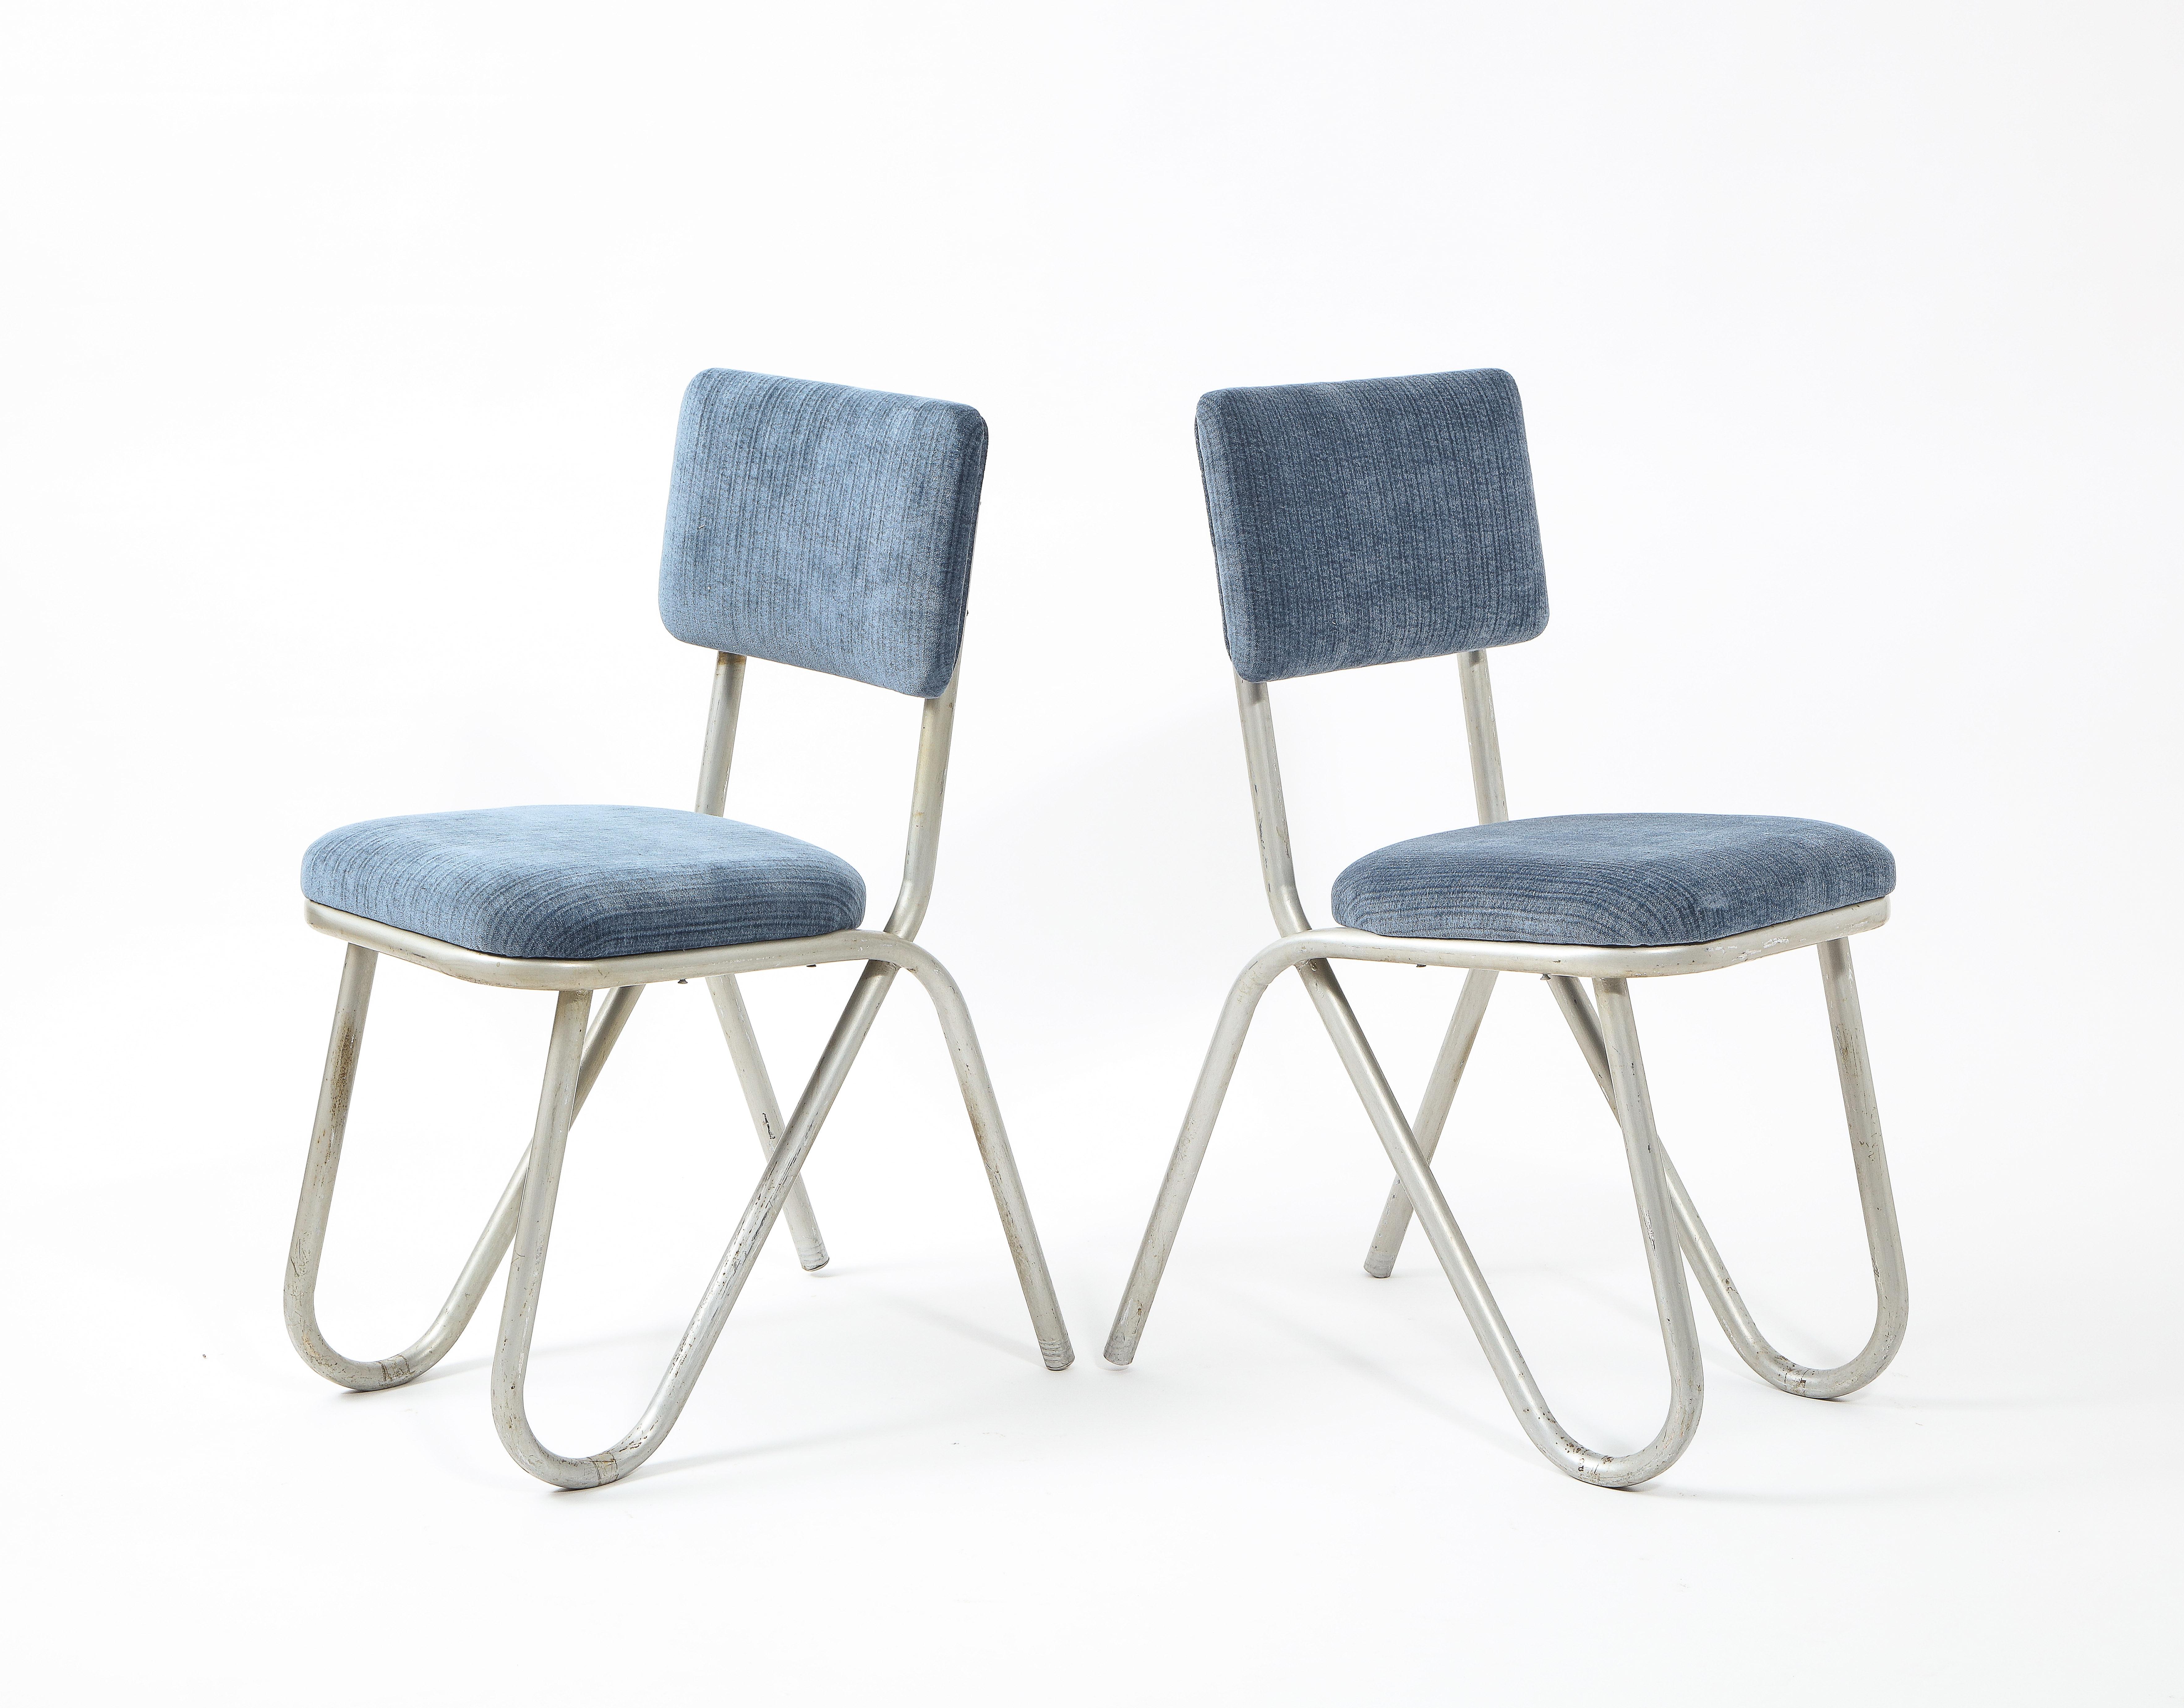 Steel Pair of Modernist Tubular Metal Side Chairs, France 1950's